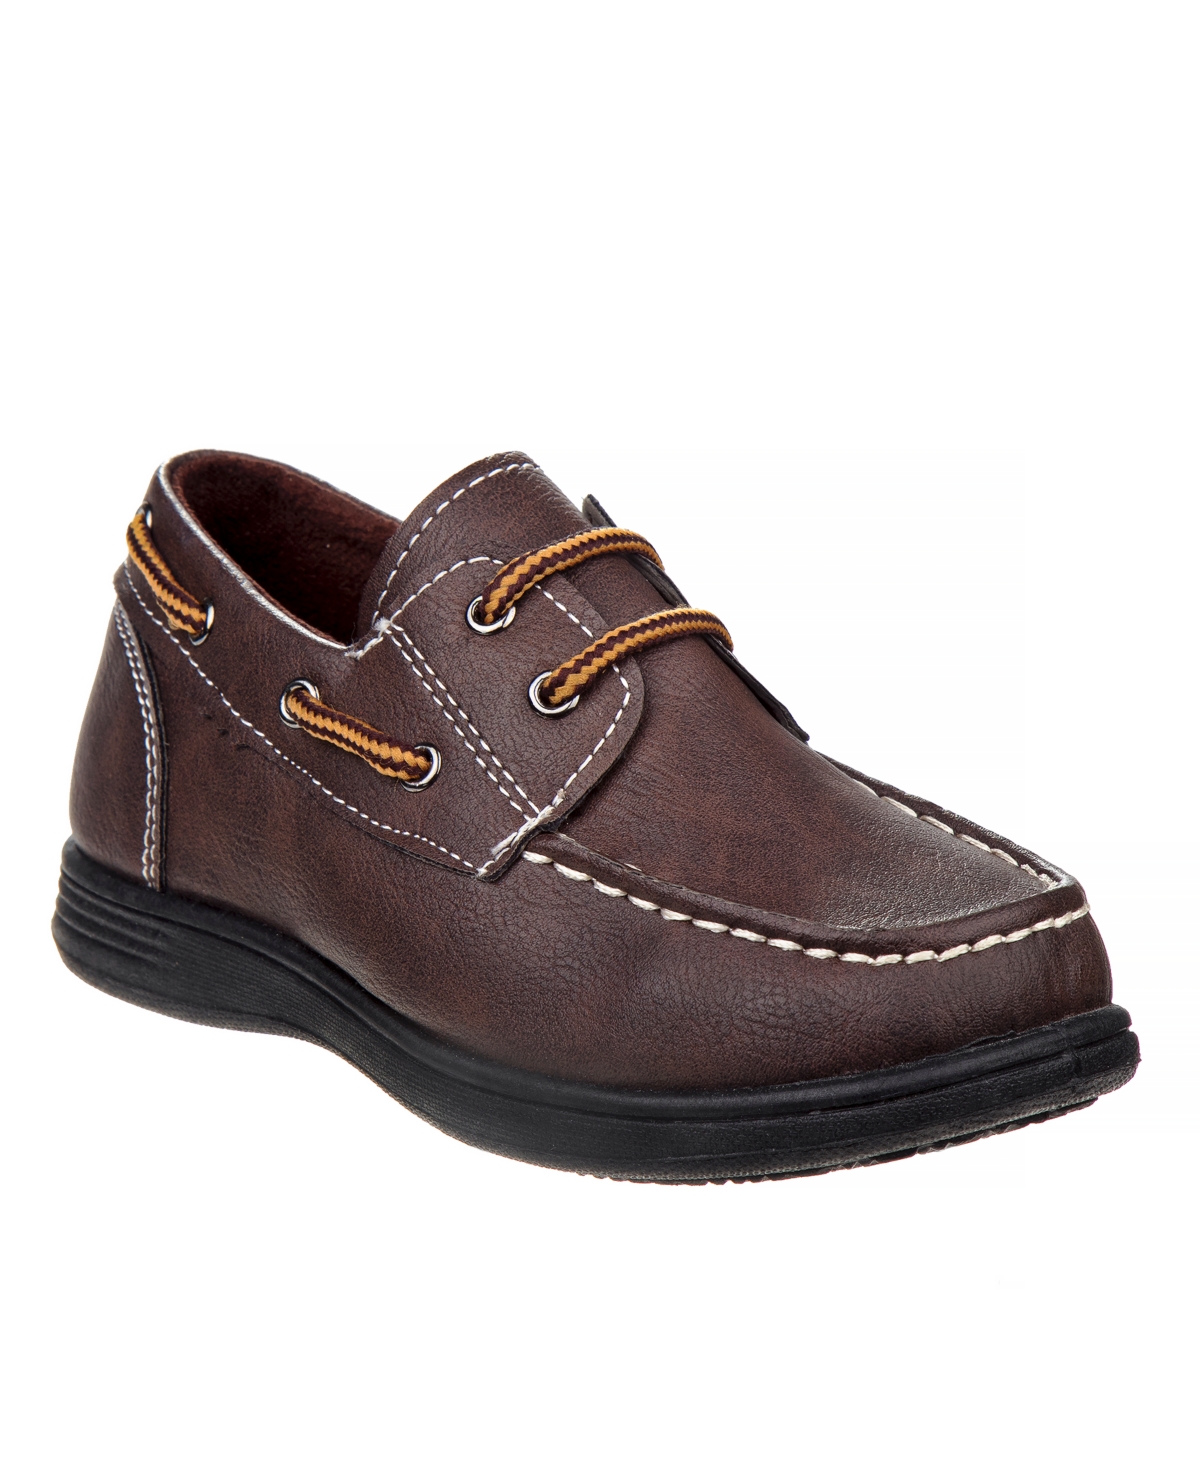 Josmo Kids' Big Boys Boat Style Casual Shoes In Brown